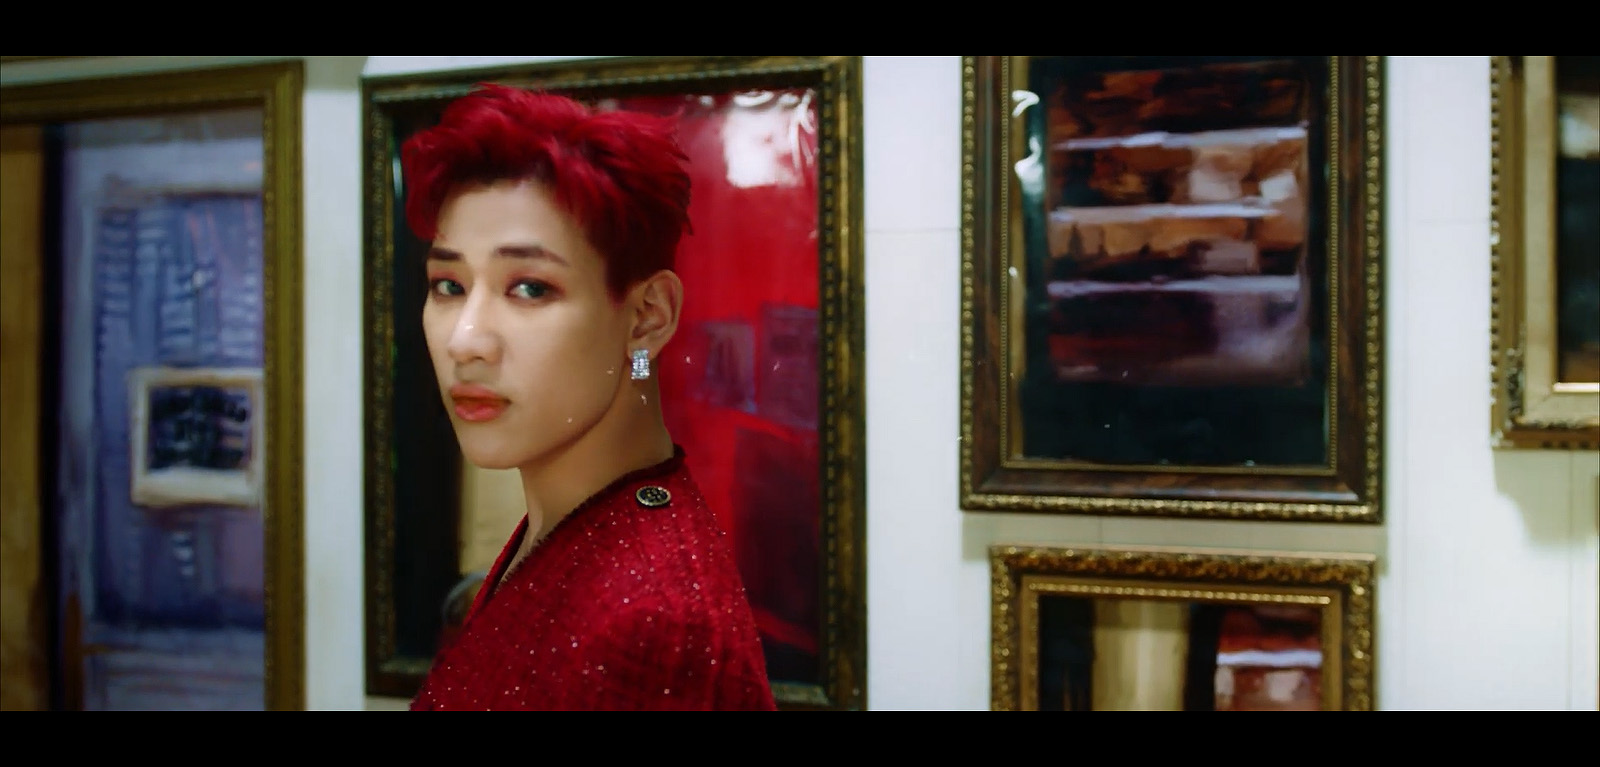 Bambam's Blue Hair in GOT7's "Last Piece" Music Video - wide 4